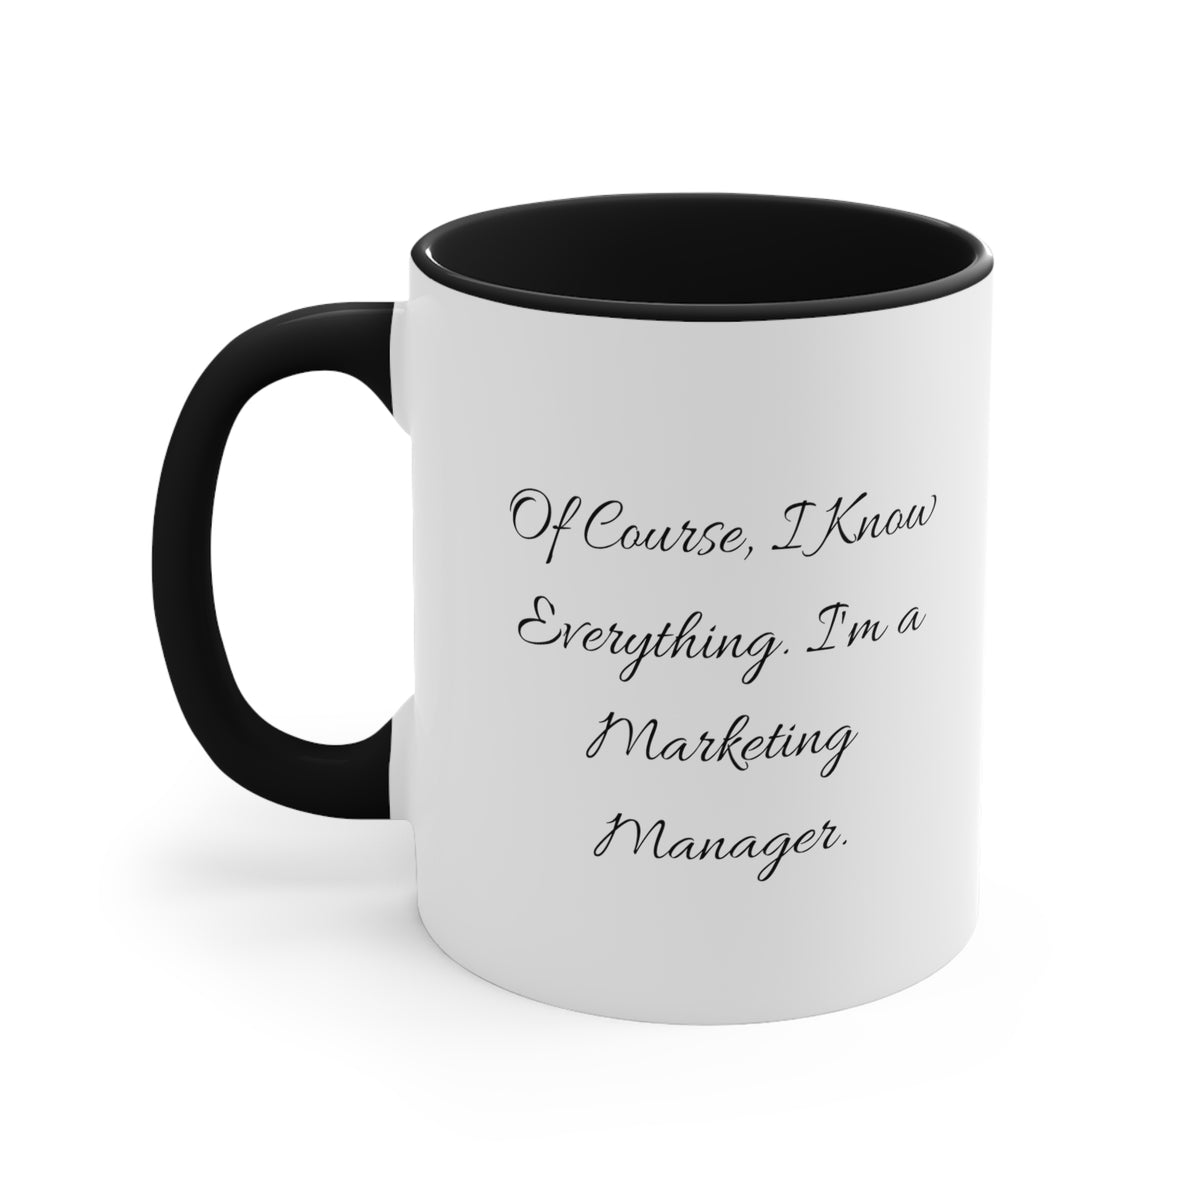 Best Marketing manager Gifts, Of Course, I Know, Special Birthday Two Tone 11oz Mug For Colleagues, Cup From Friends, Joke, Coffee mug, Tea cup, Funny saying, Humorous, Gift for him, Gift for her